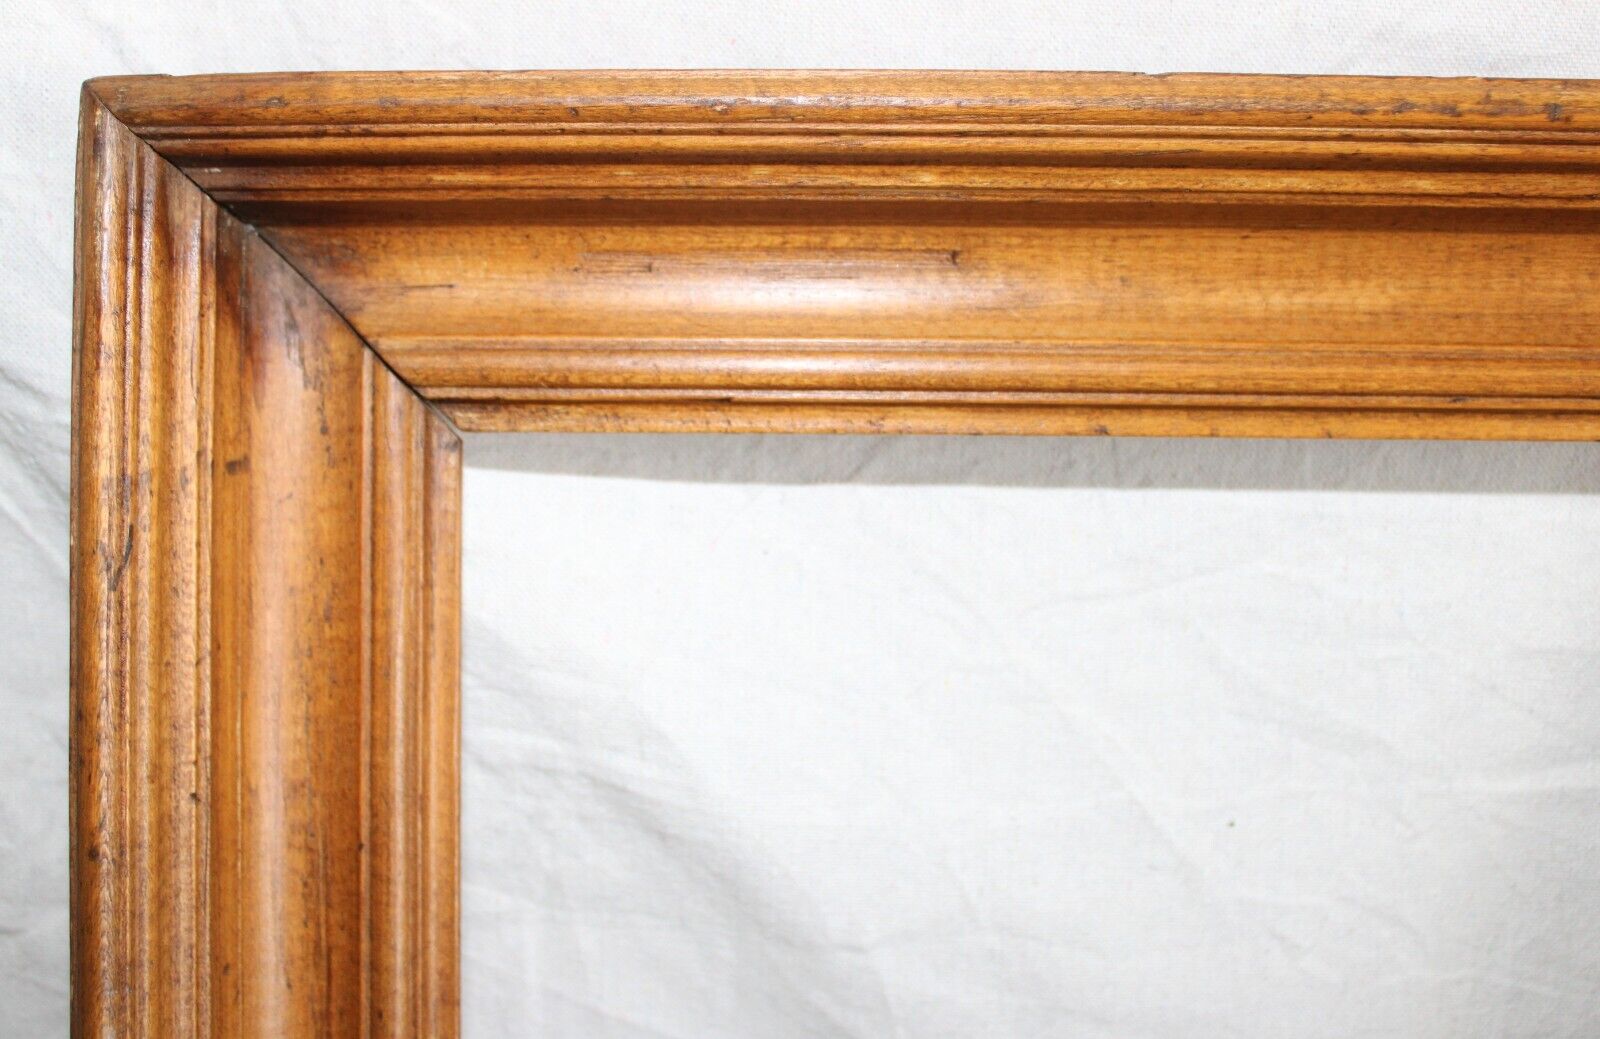 WIDE ANTIQUE FITS 10 X 12 PICTURE FRAME FINE ART WOOD VICTORIAN DEEP COUNTRY